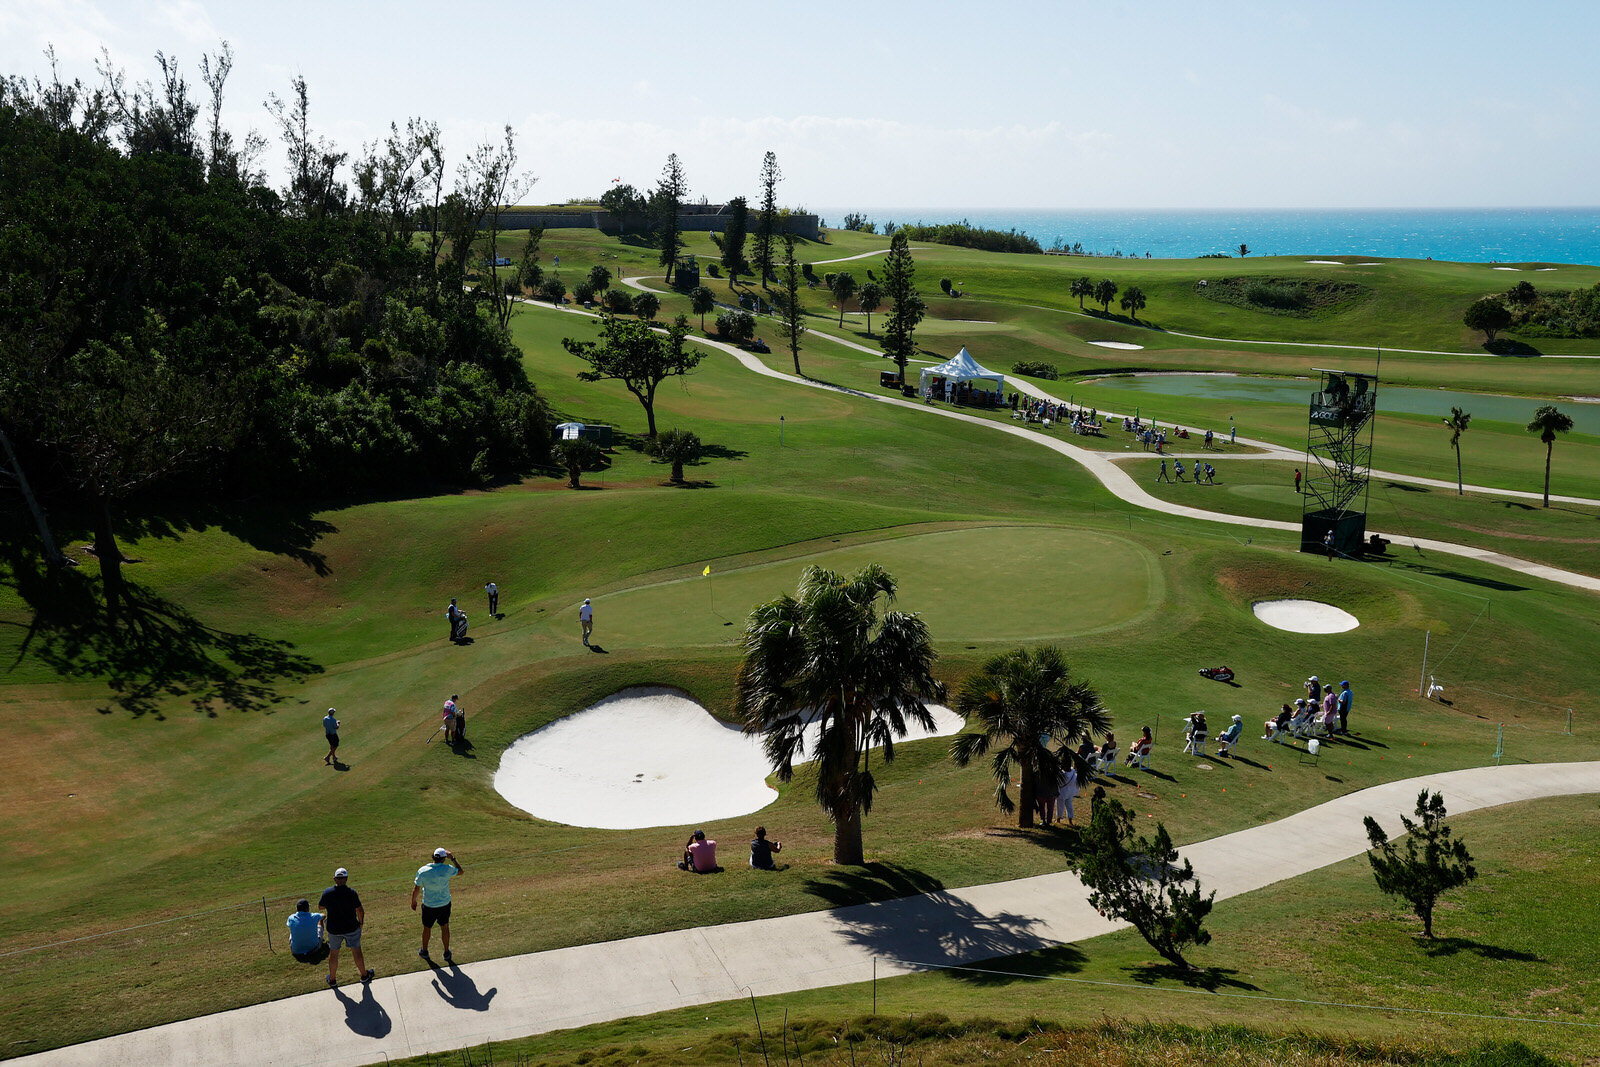  SOUTHAMPTON, BERMUDA - OCTOBER 30: A general view as fans look on from around the 13th green during the second round of the Bermuda Championship at Port Royal Golf Course on October 30, 2020 in Southampton, Bermuda. (Photo by Gregory Shamus/Getty Im